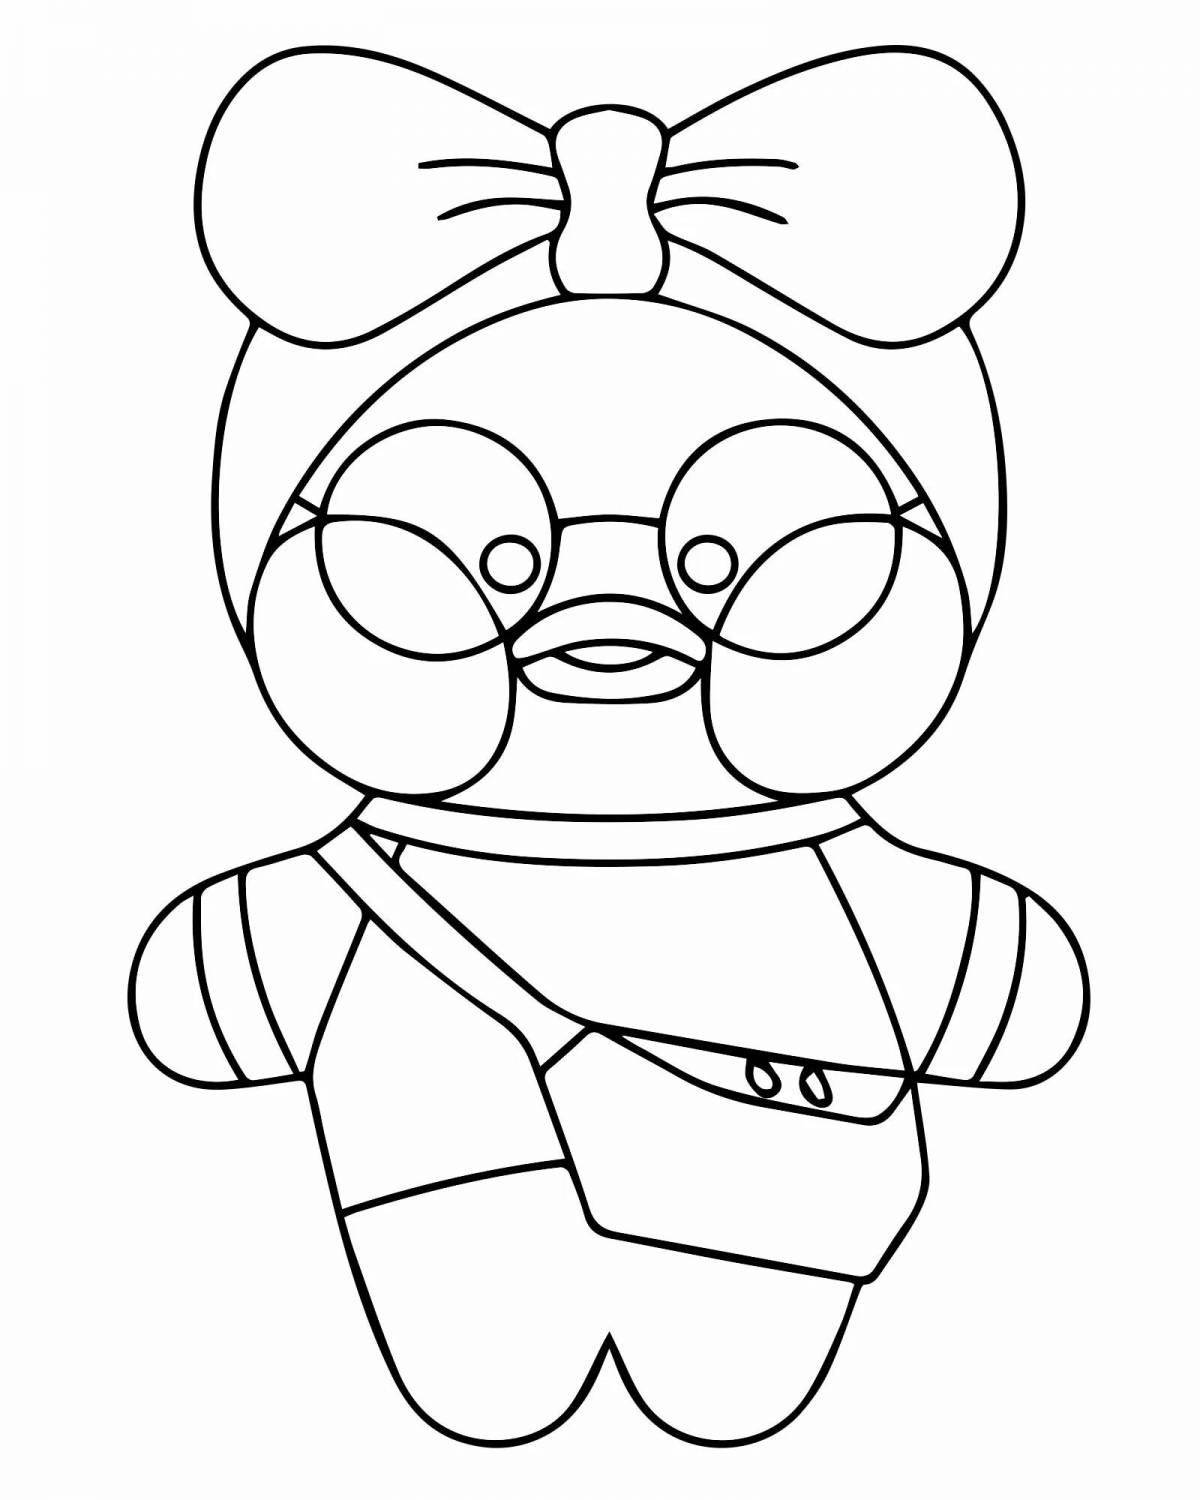 Coloring page of seductive clothes for ooty lalafanfan